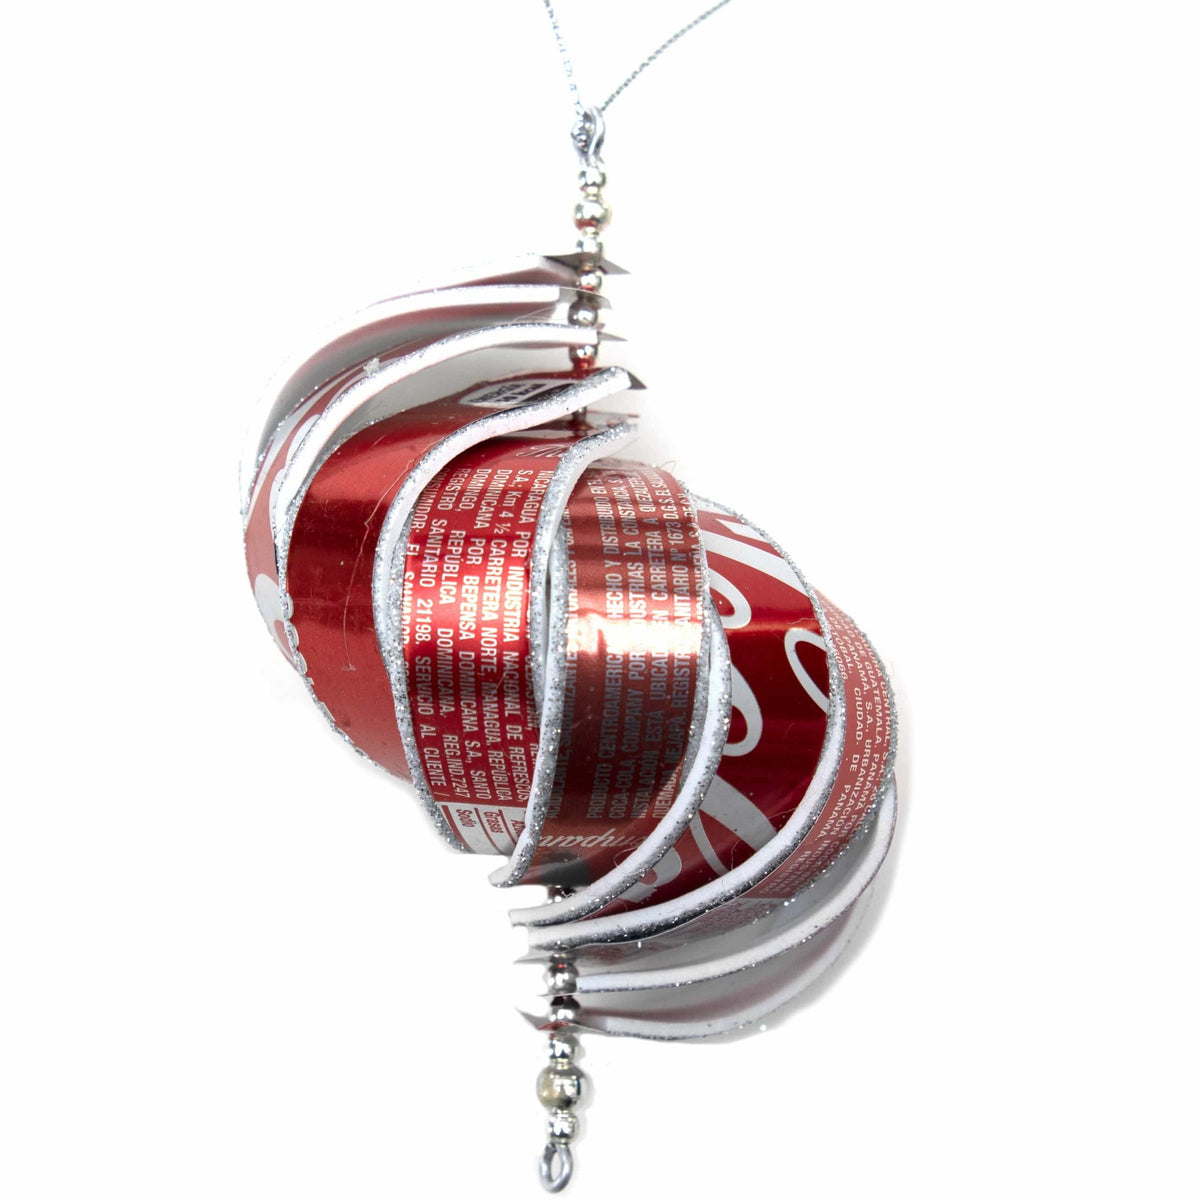 Recycled Spiral Ornament Made from Coke Cans